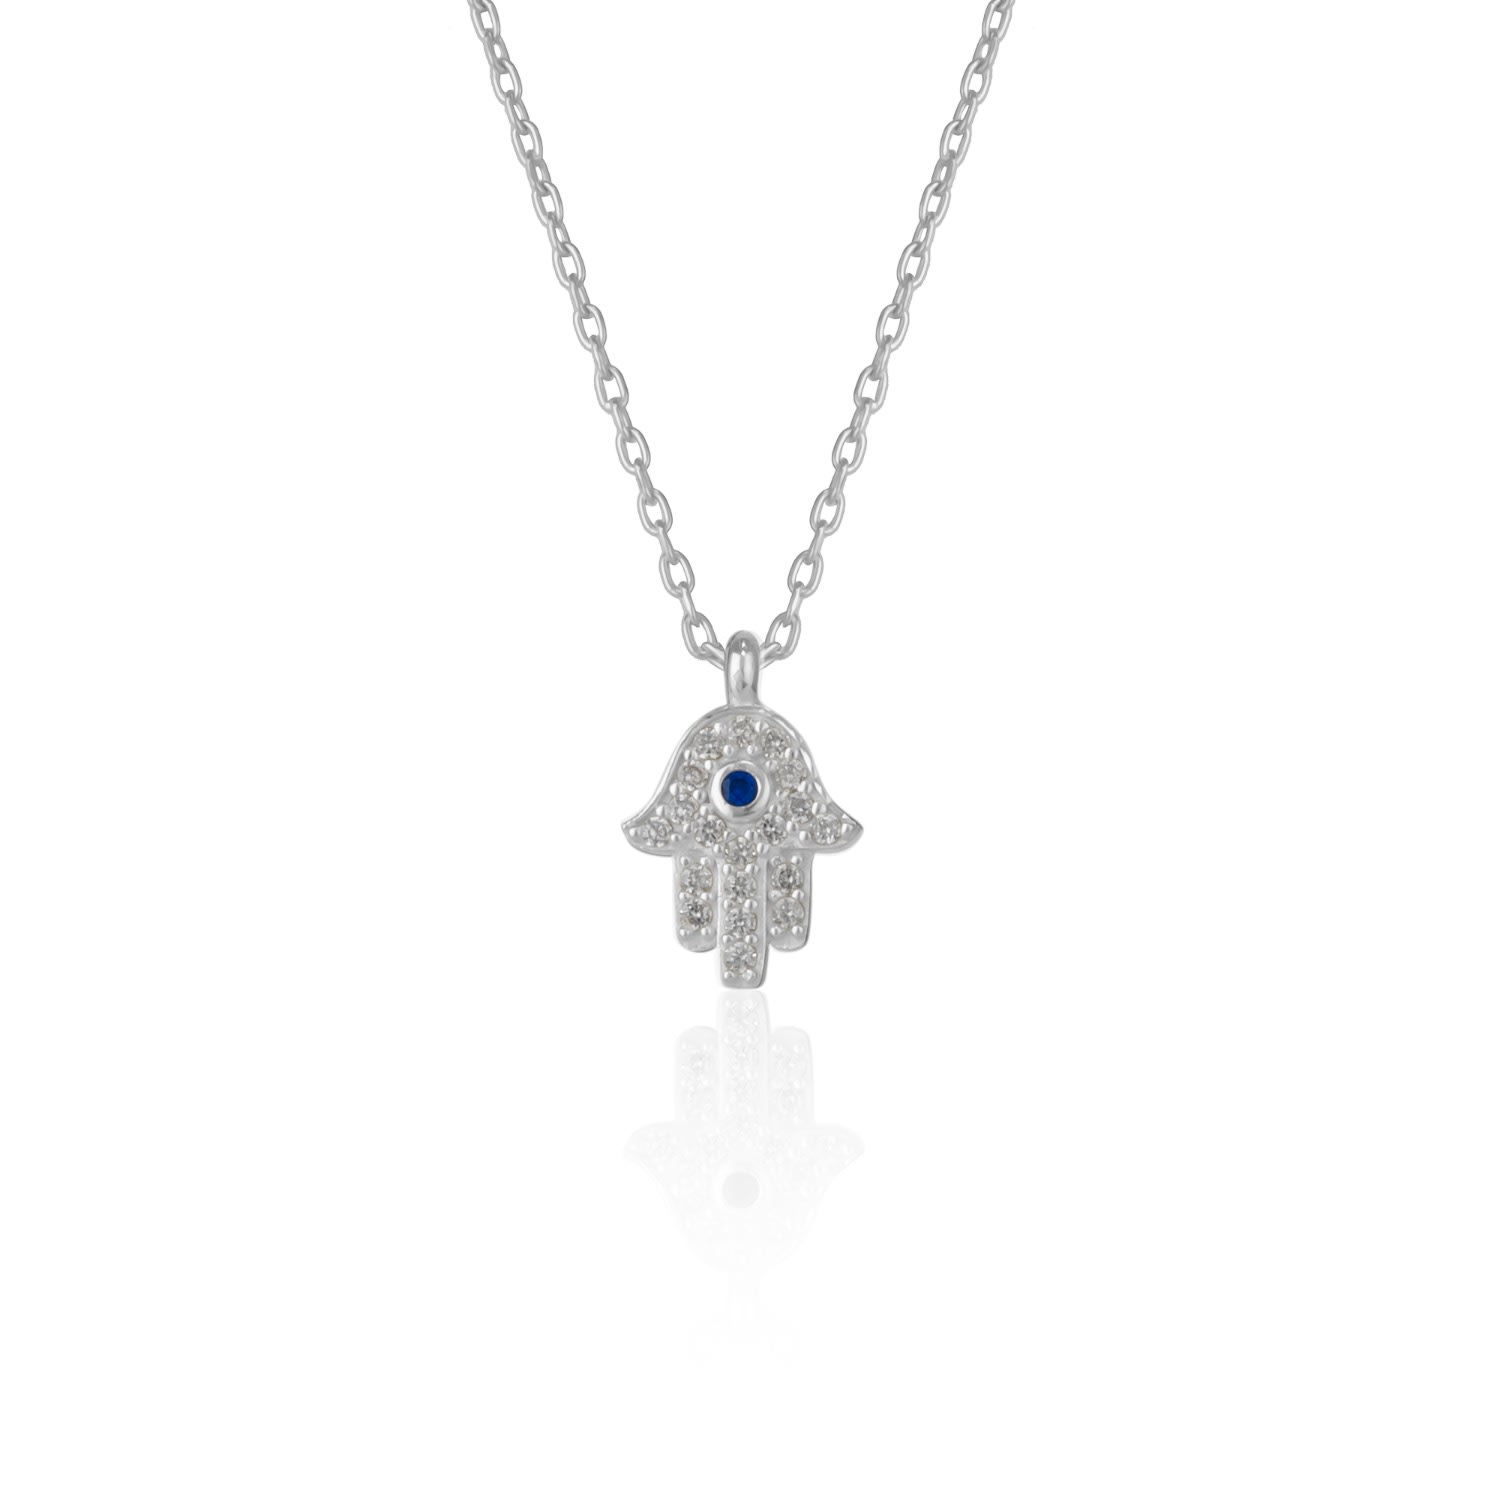 Spero London Women's Hamsa H& Necklace Sterling Silver With Blue Stone - Silver